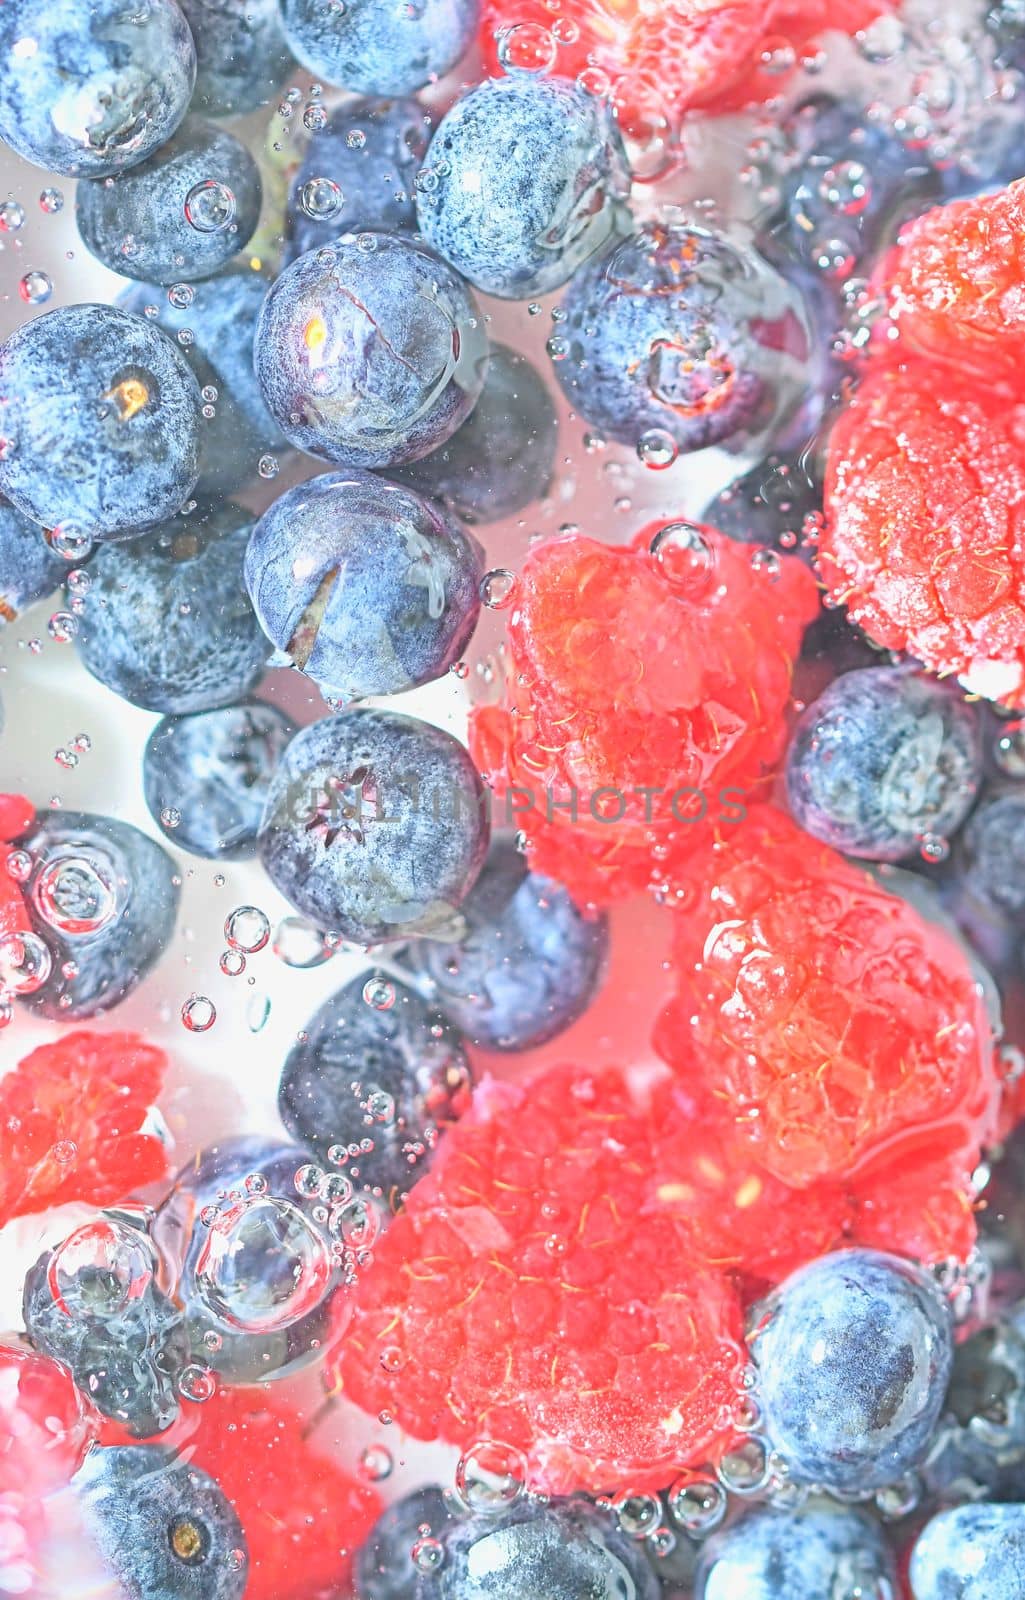 Blueberries and raspberries in liquid with bubbles. Colourful ripe bilberries and raspberries in water. Close-up of fresh berries in water background. Top view, flat design. Vertical macro image.